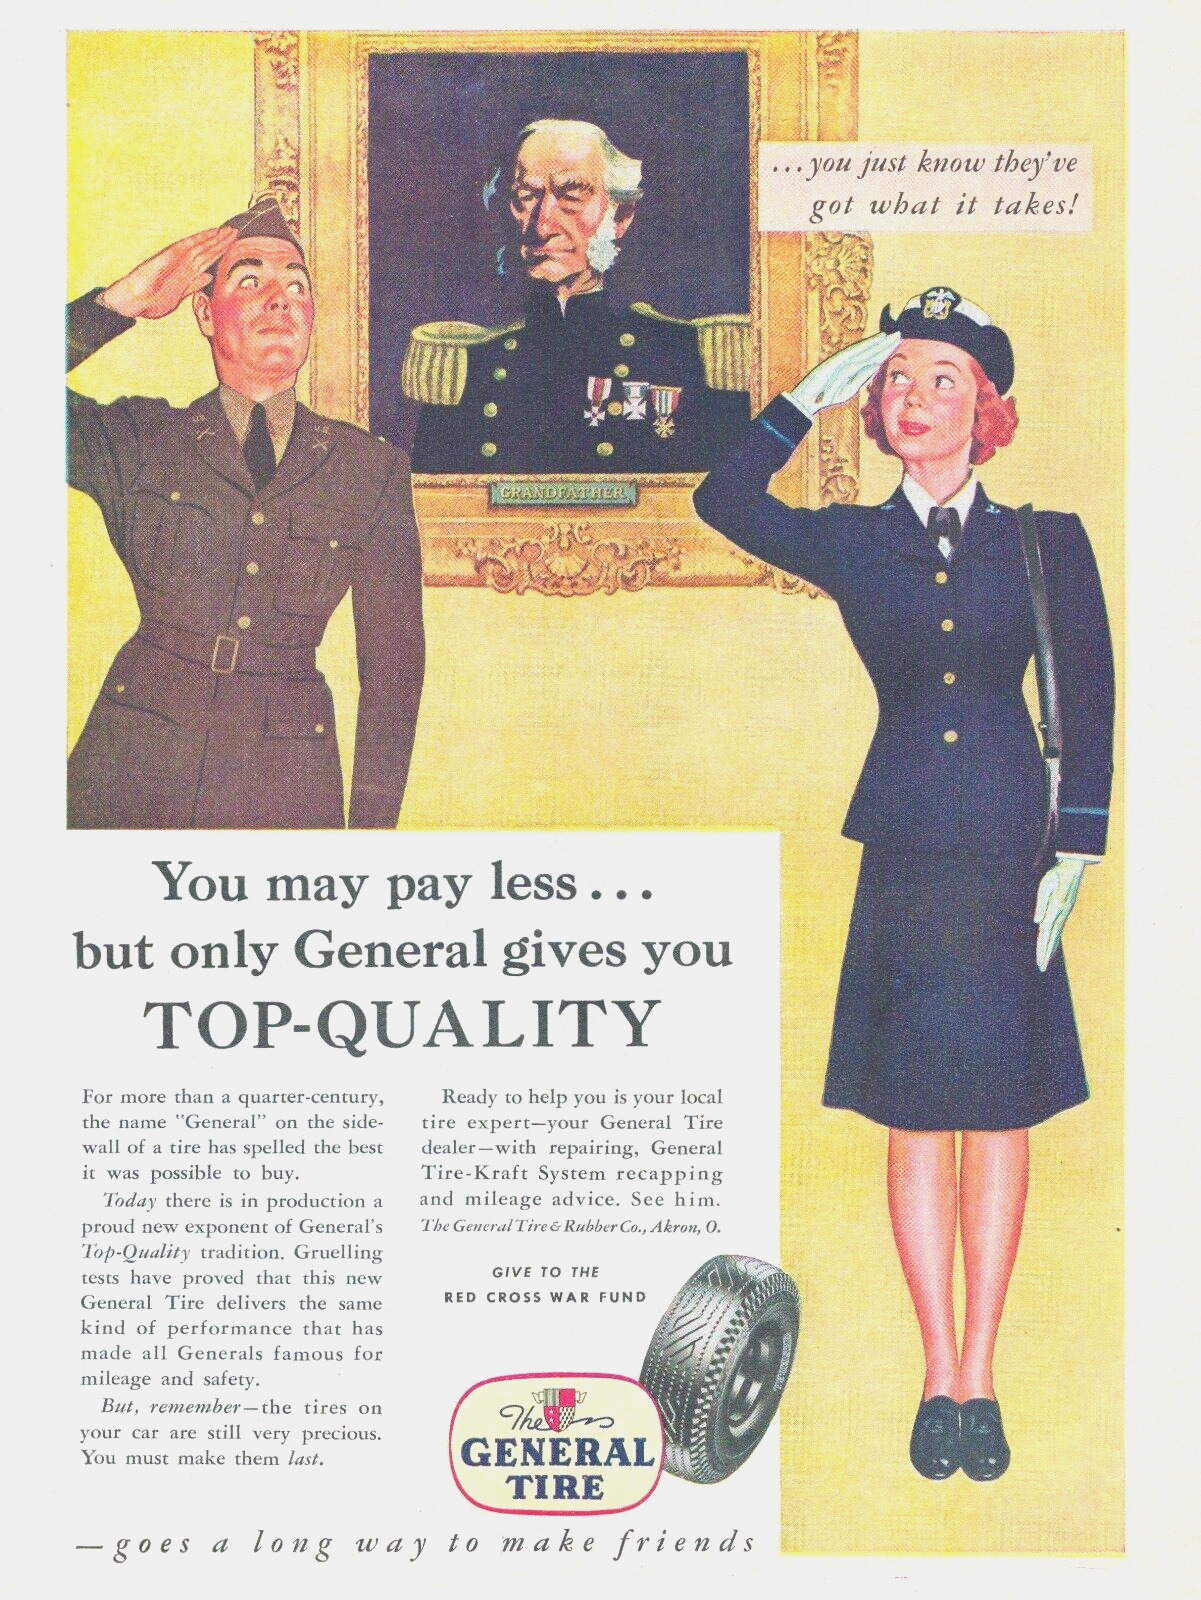 1944 GENERAL TIRE Red Cross War Fund Army Navy man woman soldier ART PRINT AD